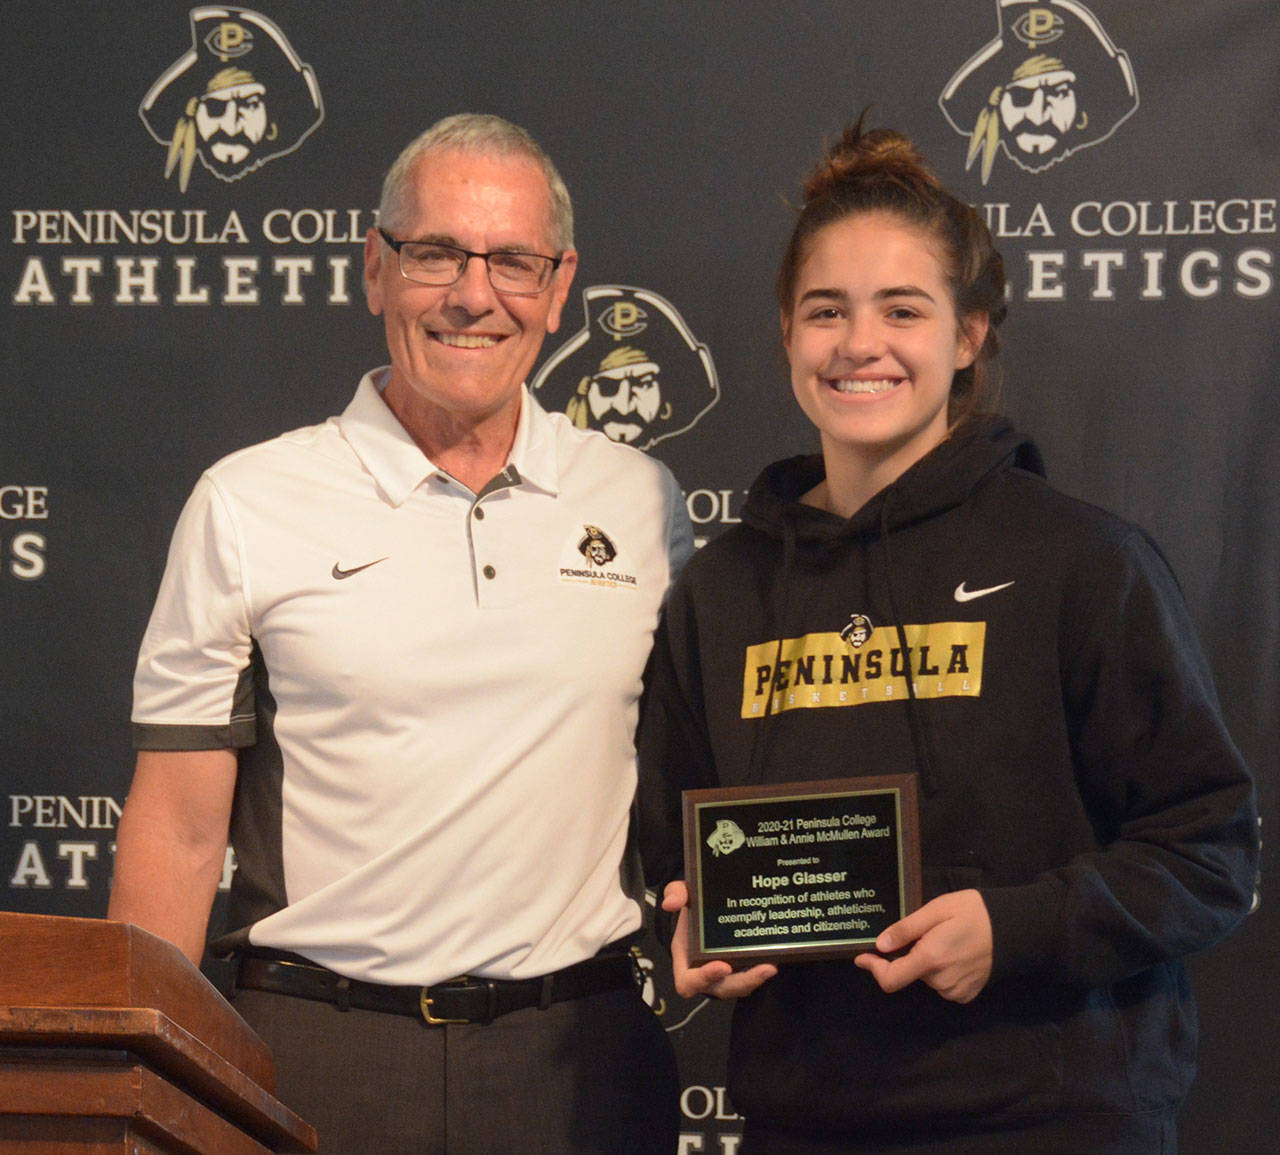 Hope Glasser of Sequim accepts an award heralding efforts by freshmen PC student-athletes from Rick Ross, associate dean of Athletics and Student Life, at an in-person ceremony May 27. Photo curtesy of Peninsula College